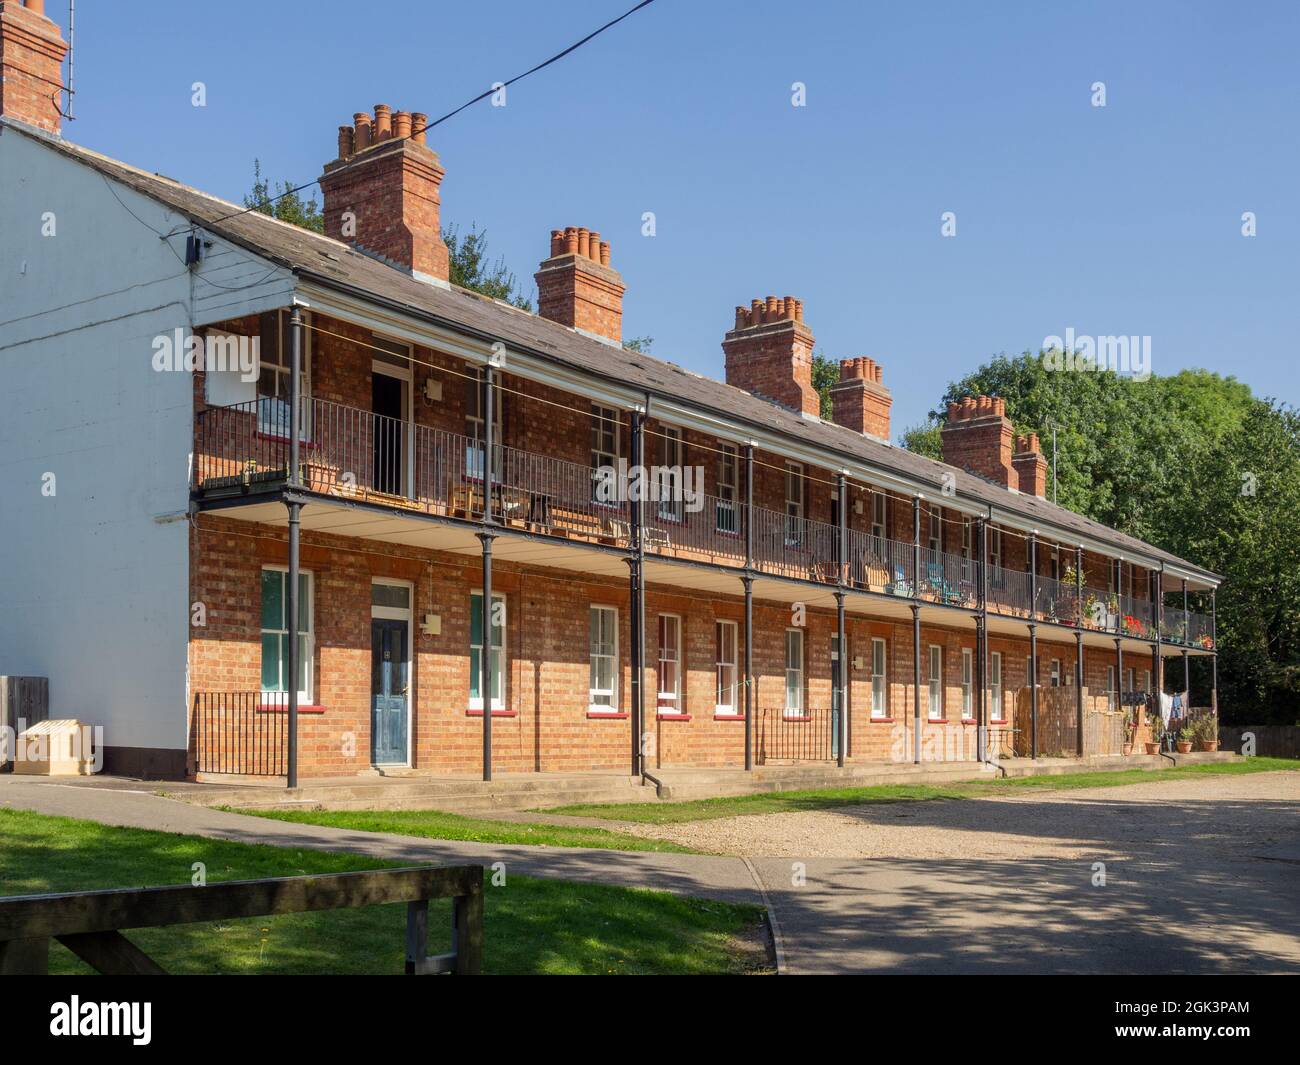 19th century former firemans' quarters for Weedon Depot, Weedon Bec, Northamptonshire, UK; now council flats Stock Photo